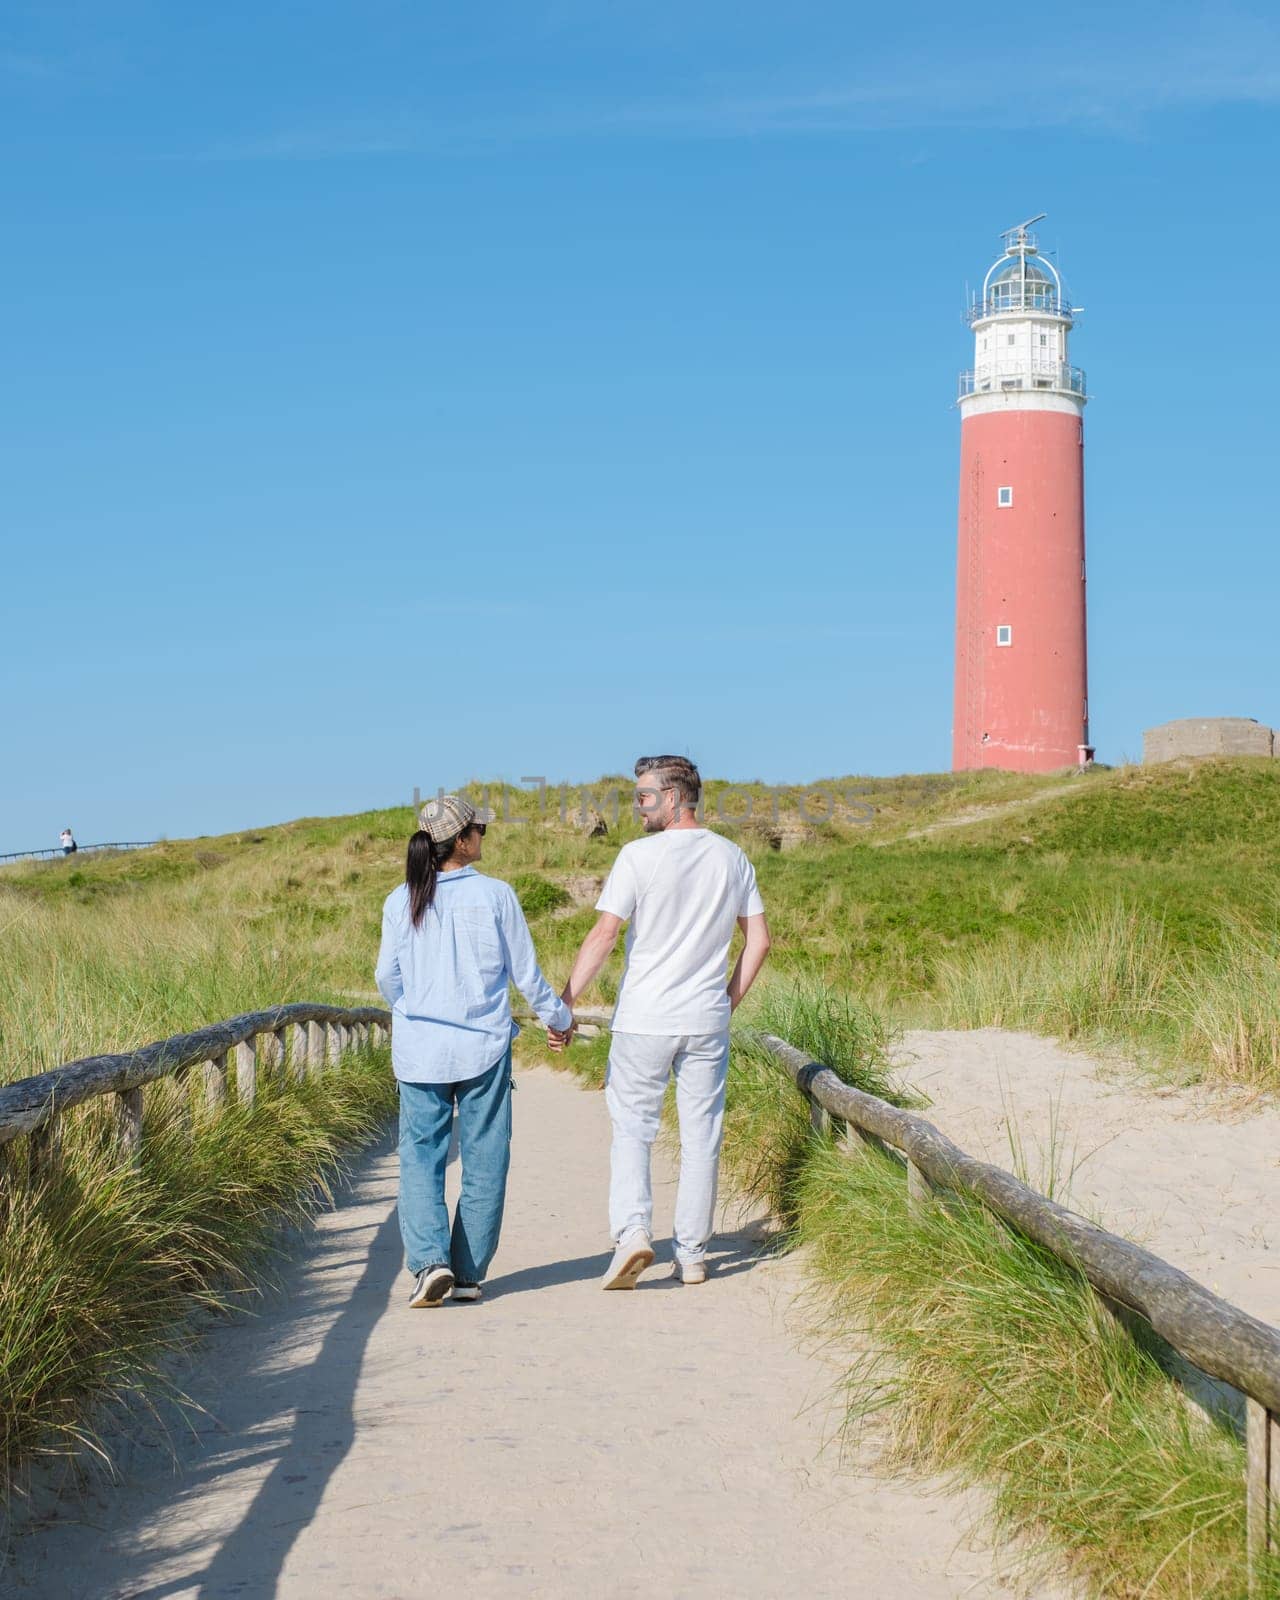 A couple strolls hand in hand on a winding path, gazing out at the iconic lighthouse along the Texel, Netherlands shoreline. The iconic red lighthouse of Texel Netherlands